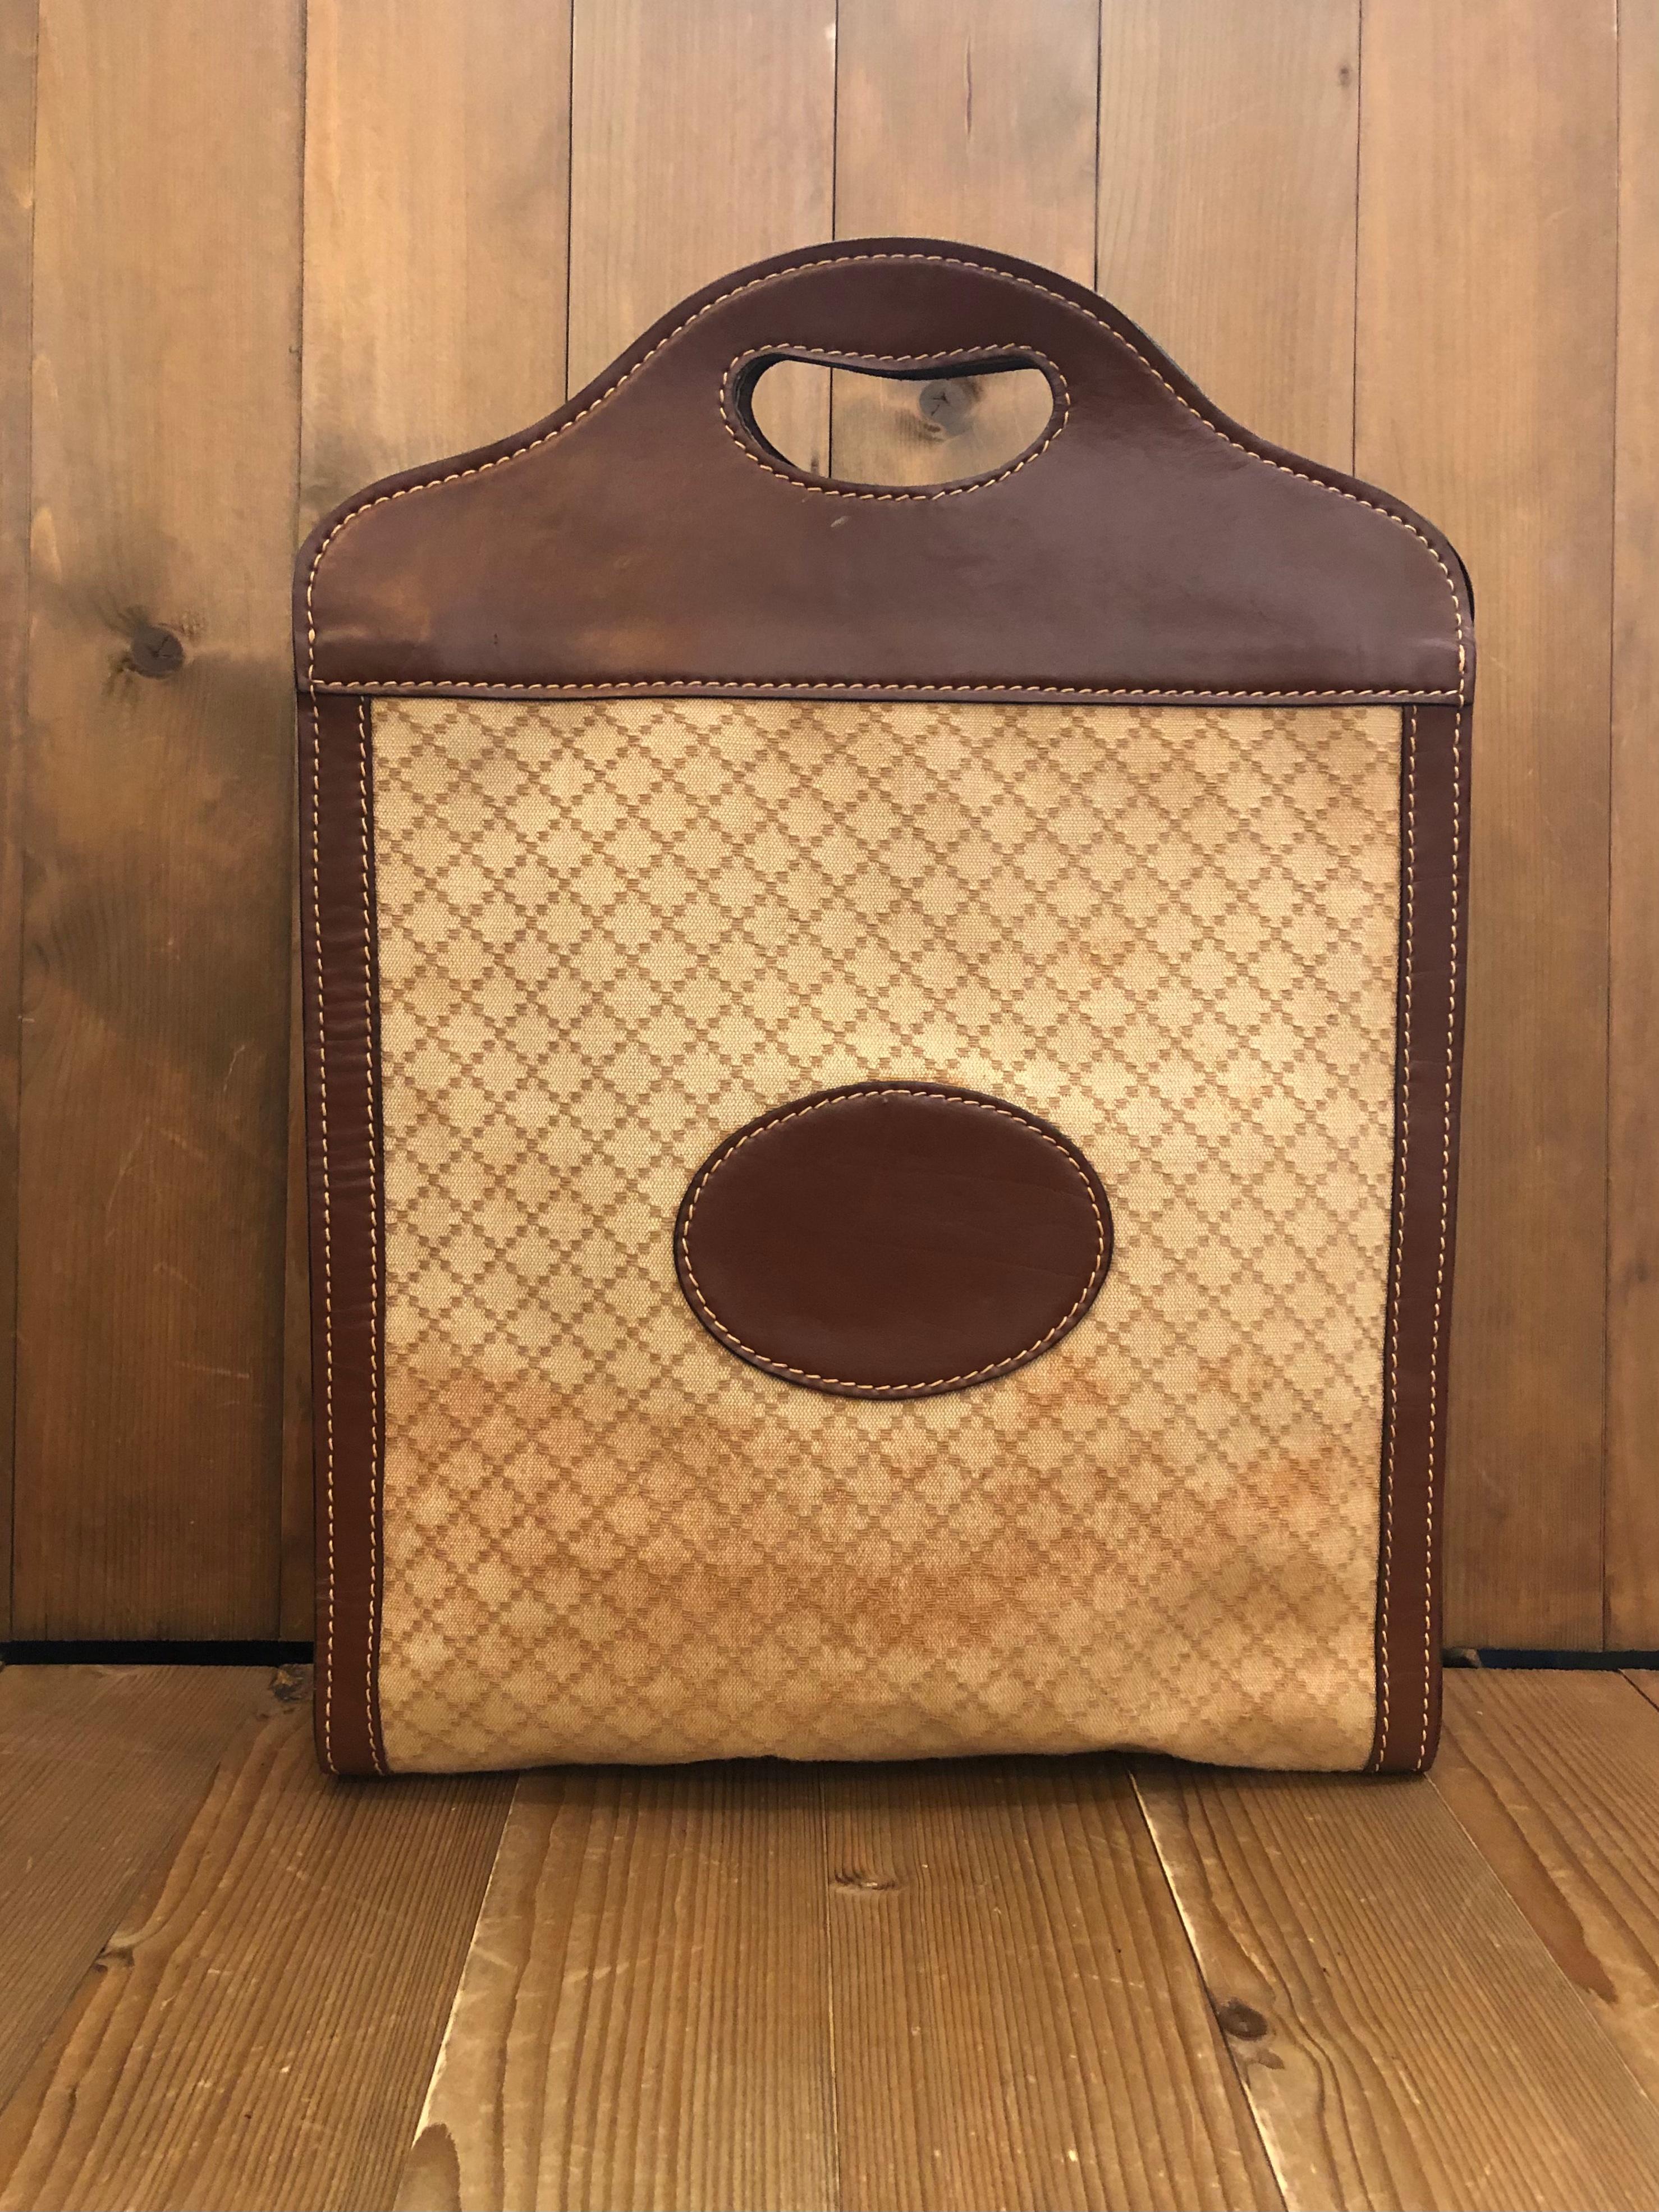 1970s Gucci book tote in Gucci iconic brown diamanté jacquard and leather. Made in Italy. Measures approximately 13.5 x 18 x 2.75 inches 

Condition -  Good vintage condition with wear  from long time storage

Outside: Creases and marks on leather